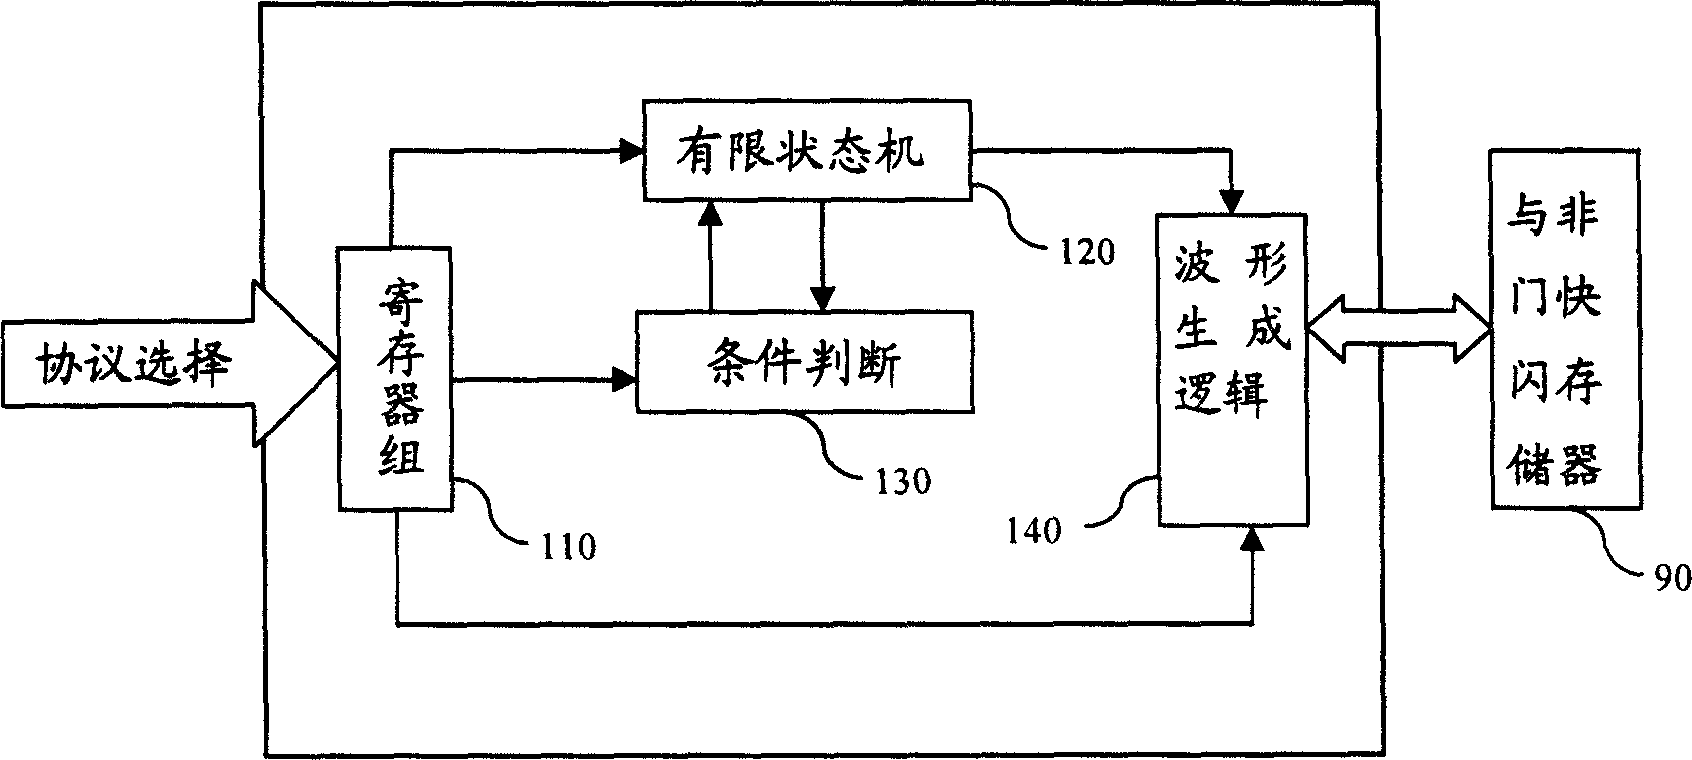 Physical interface of NAND gate quick flashing storage, interface method and management equipment